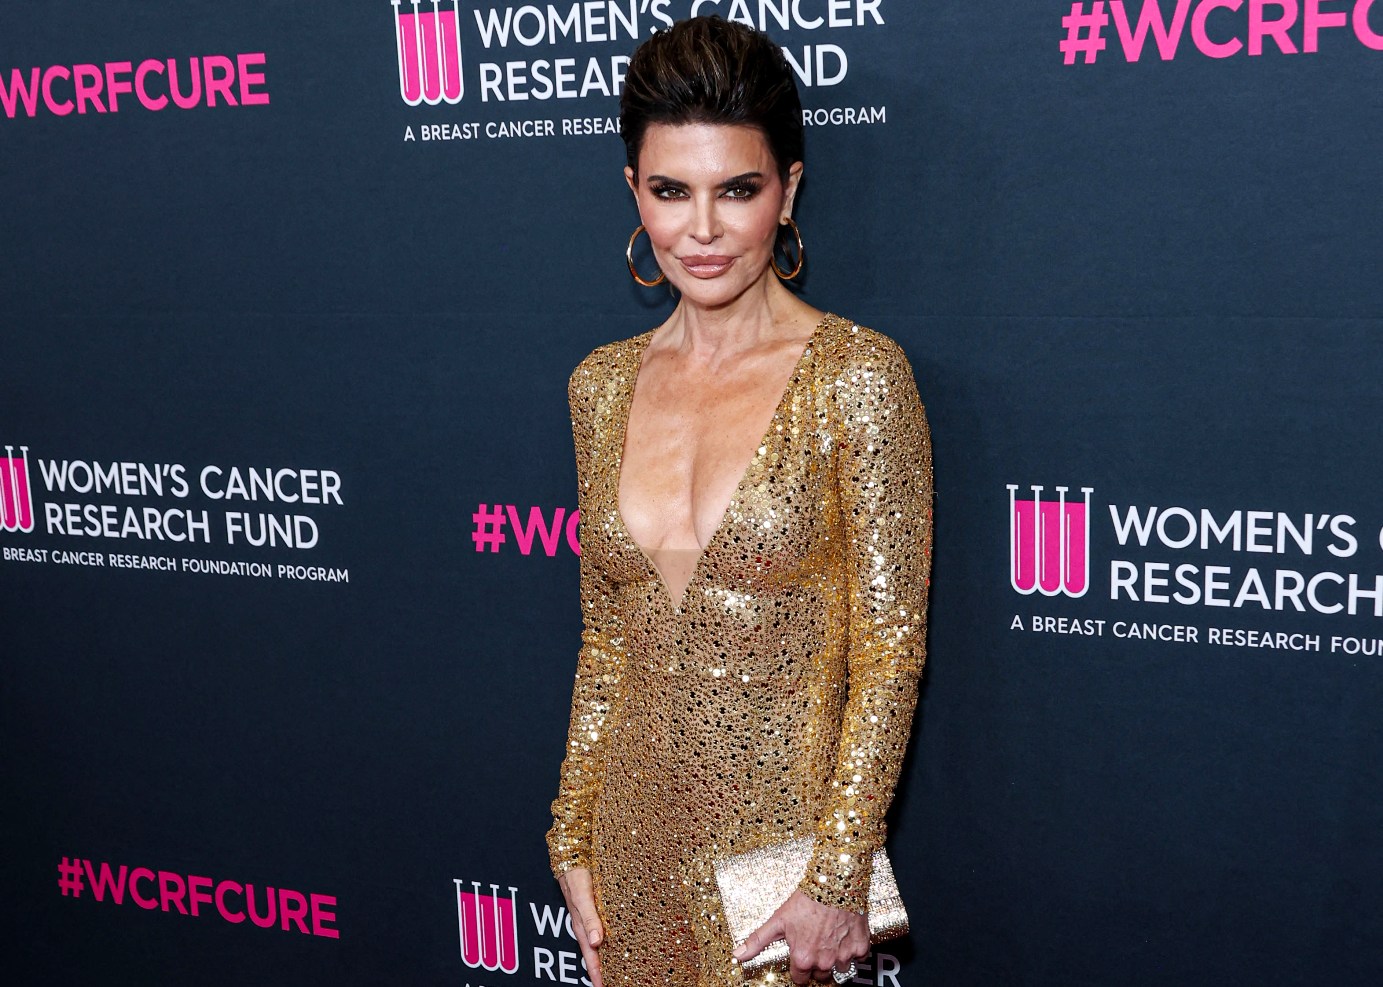 Lisa Rinna Reveals Real Reason She Quit RHOBH as She Deems Show as “Stupid,” and Shares What Has Changed Since She First Joined 